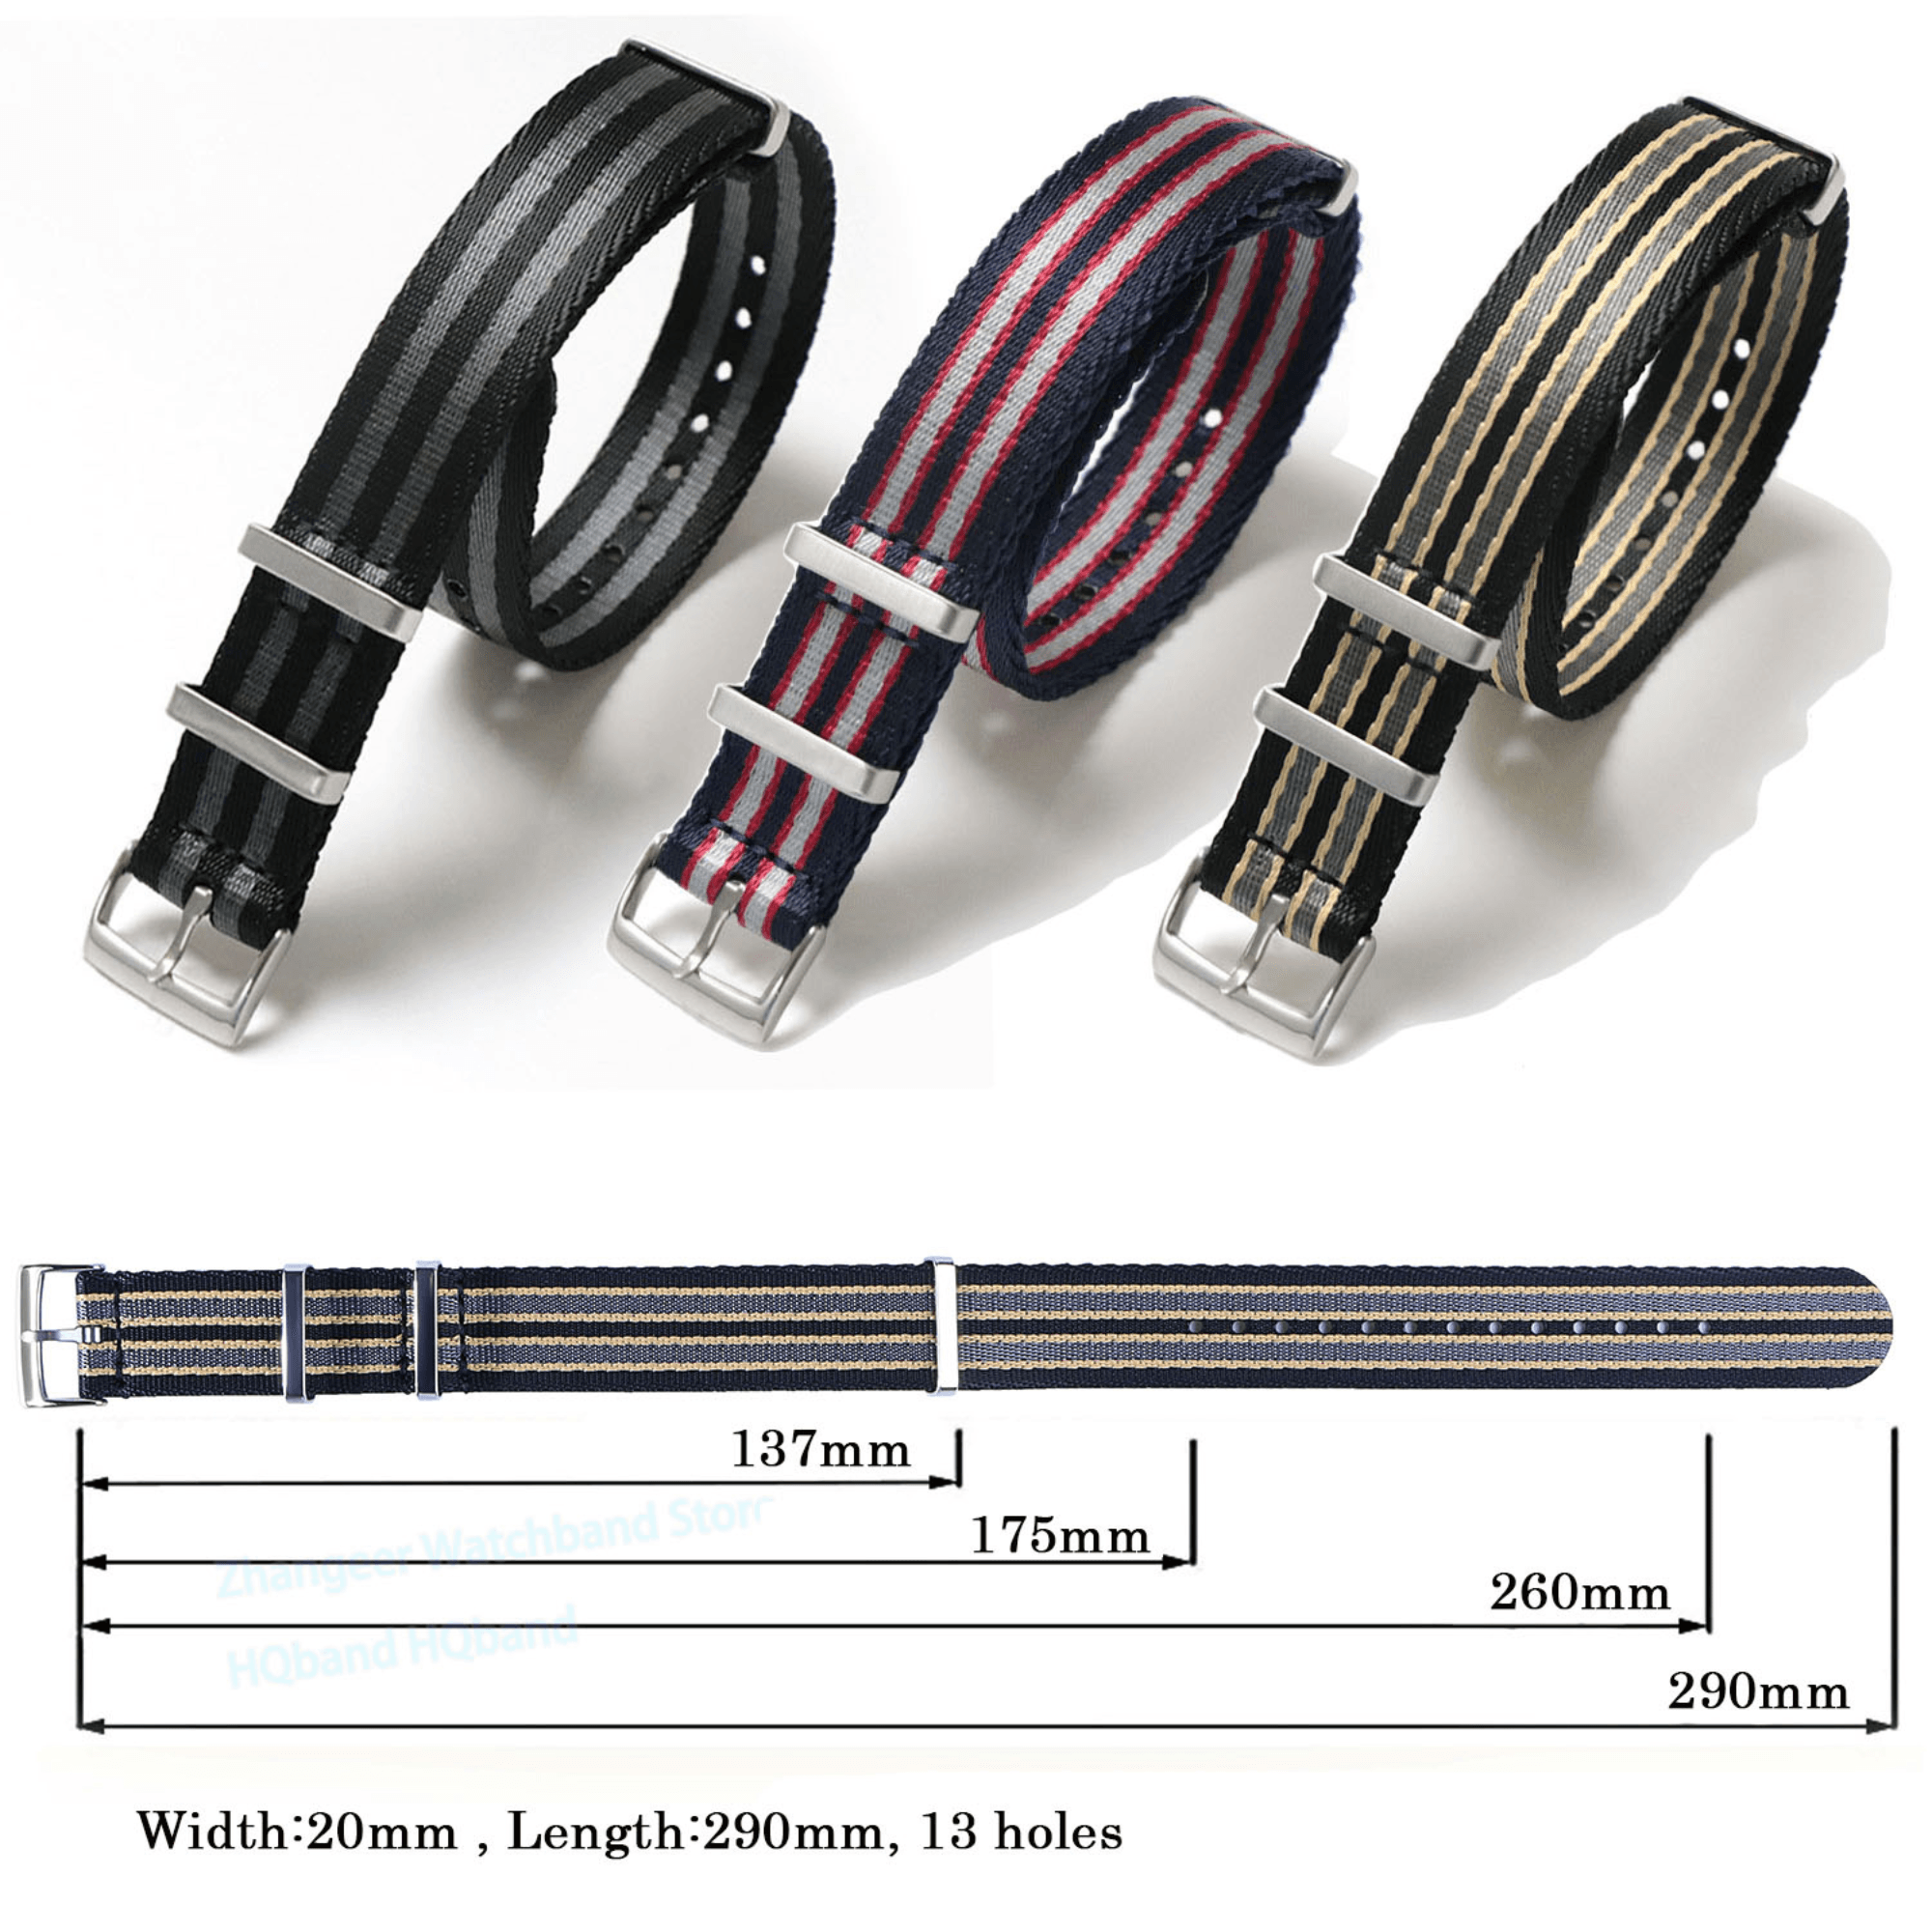 Premium Nylon Straps and Bands 20mm With Stainless Steel Buckle - Black/ Grey